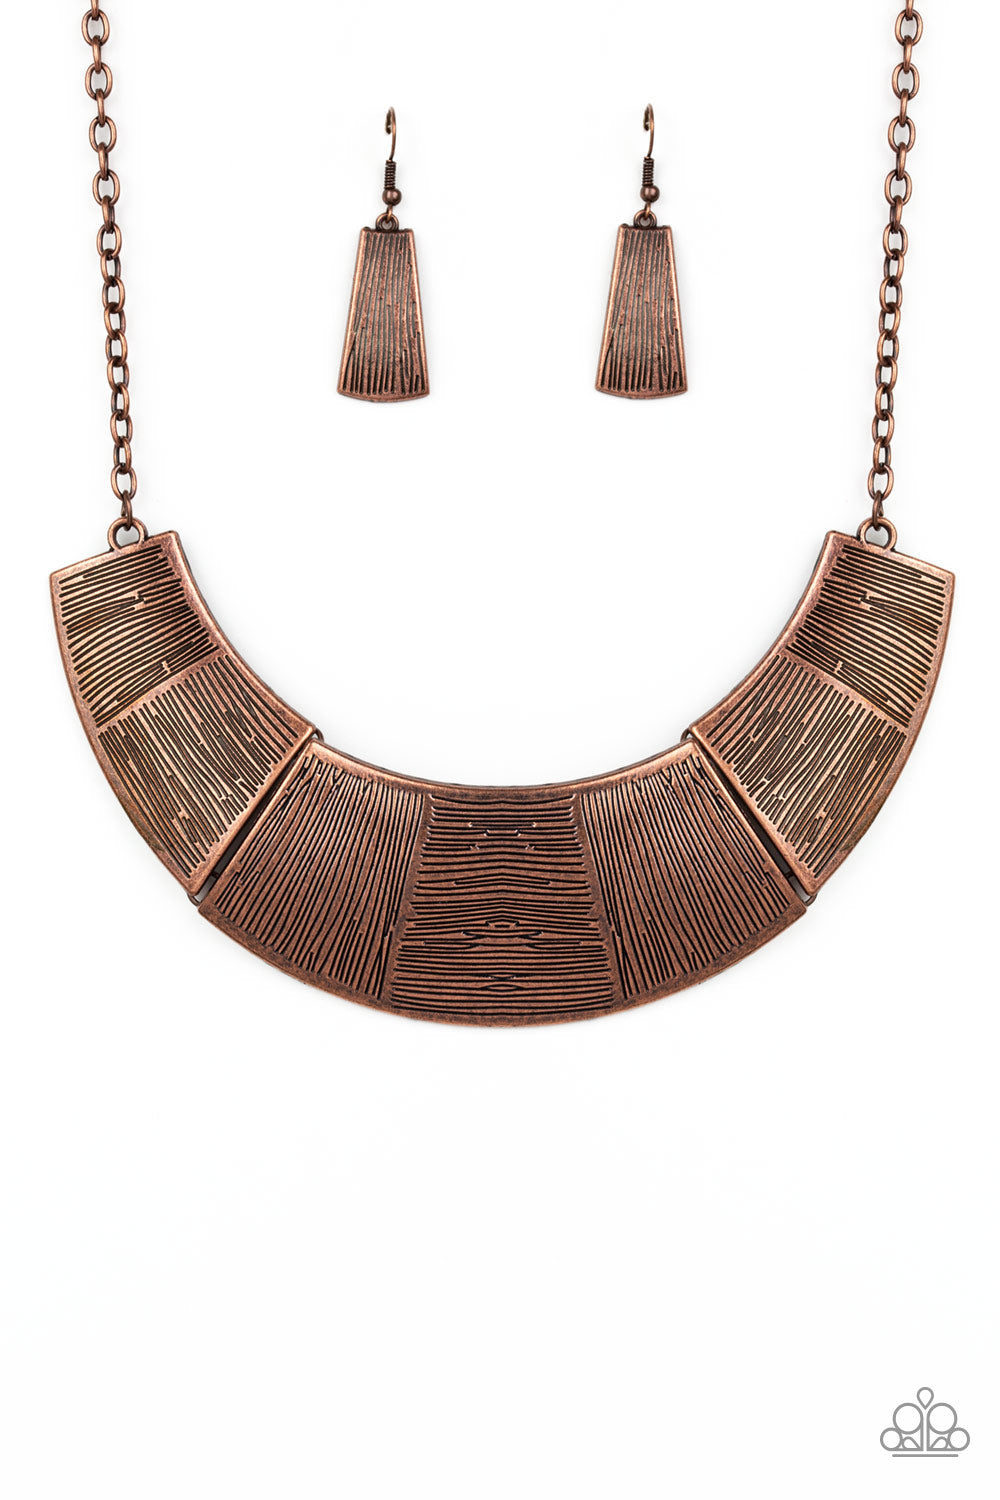 Etched in sections of vertical and horizontal linear textures, glistening antiqued copper plates link together, forming a bold half-moon pendant below the collar. Features an adjustable clasp closure.